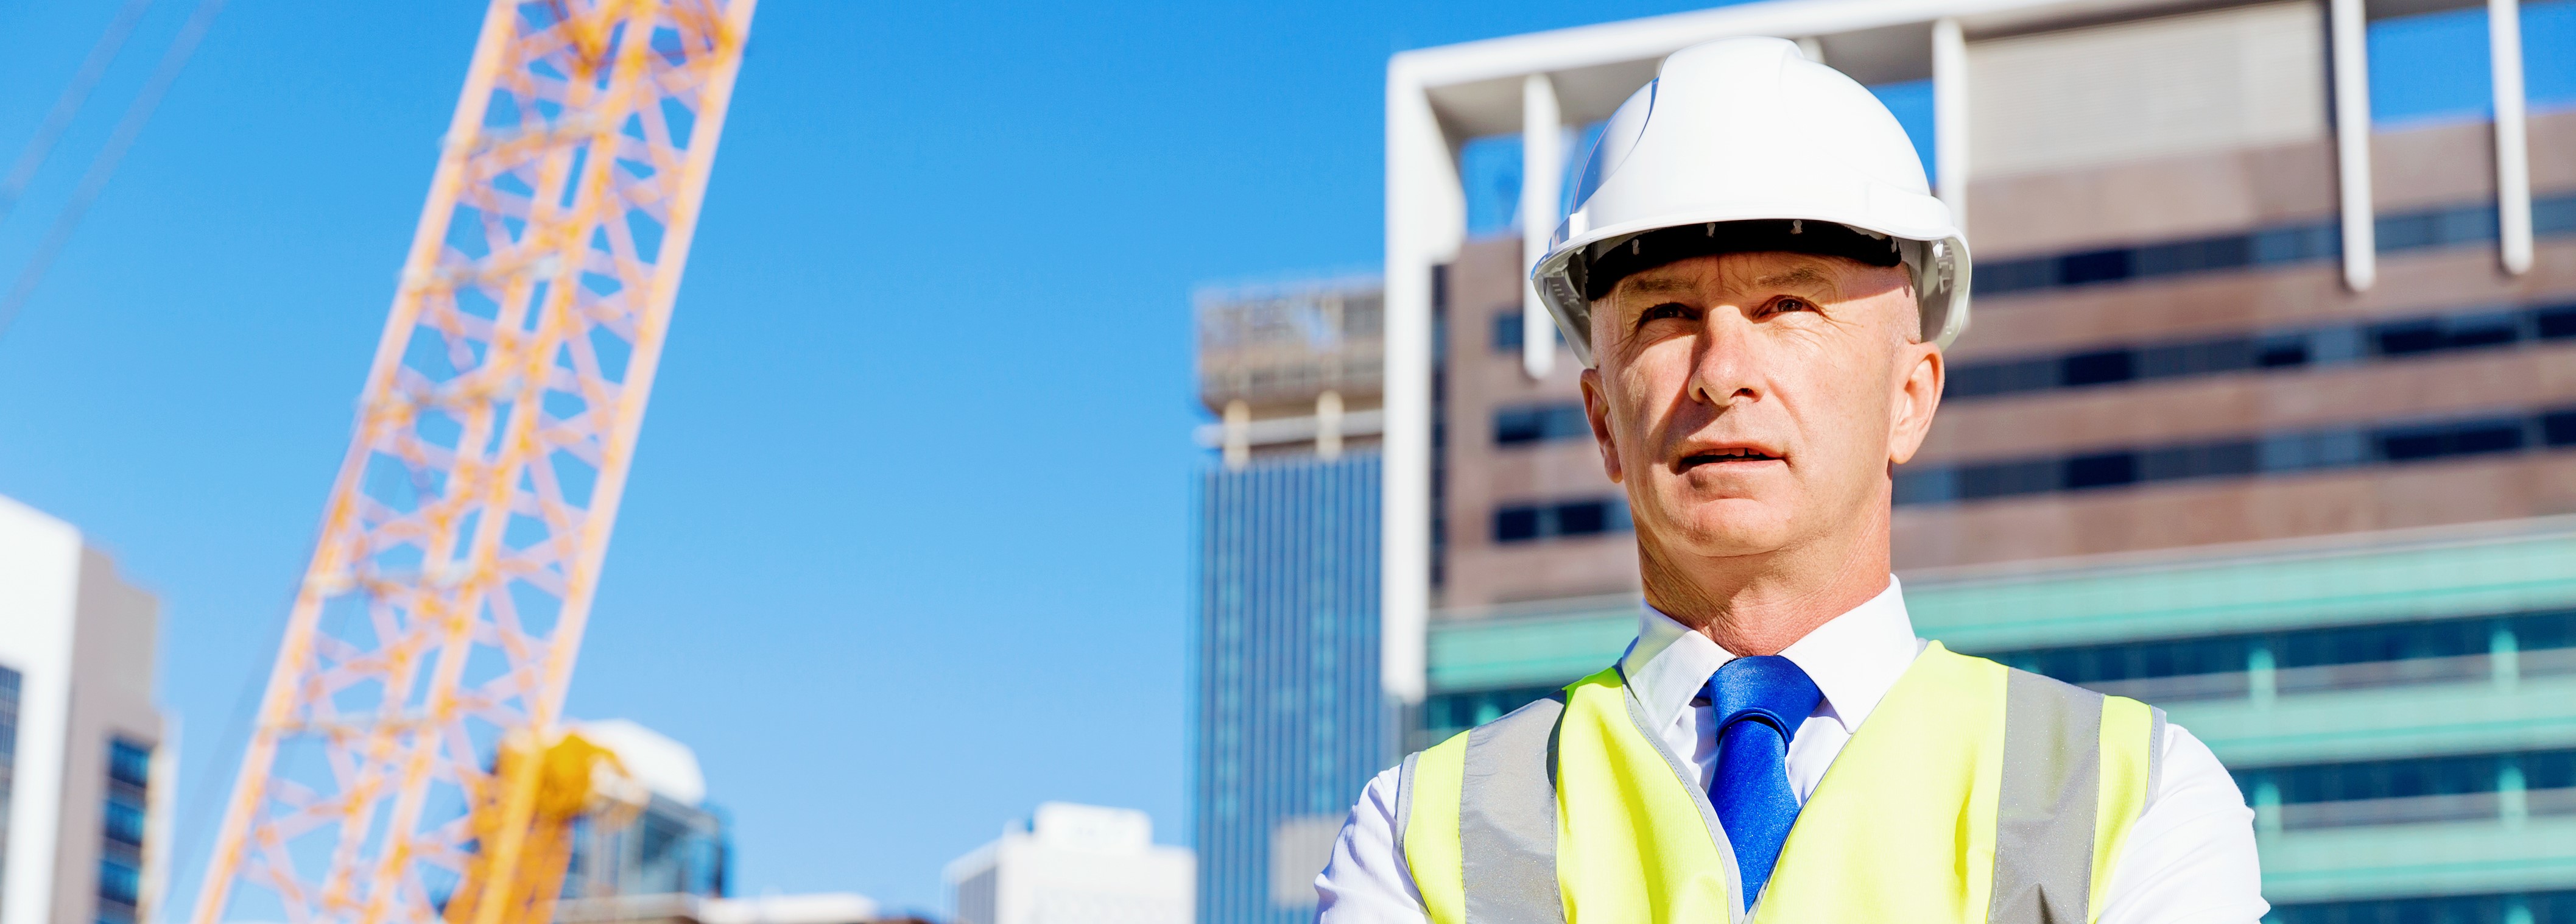 image shows a Construction Site Manager